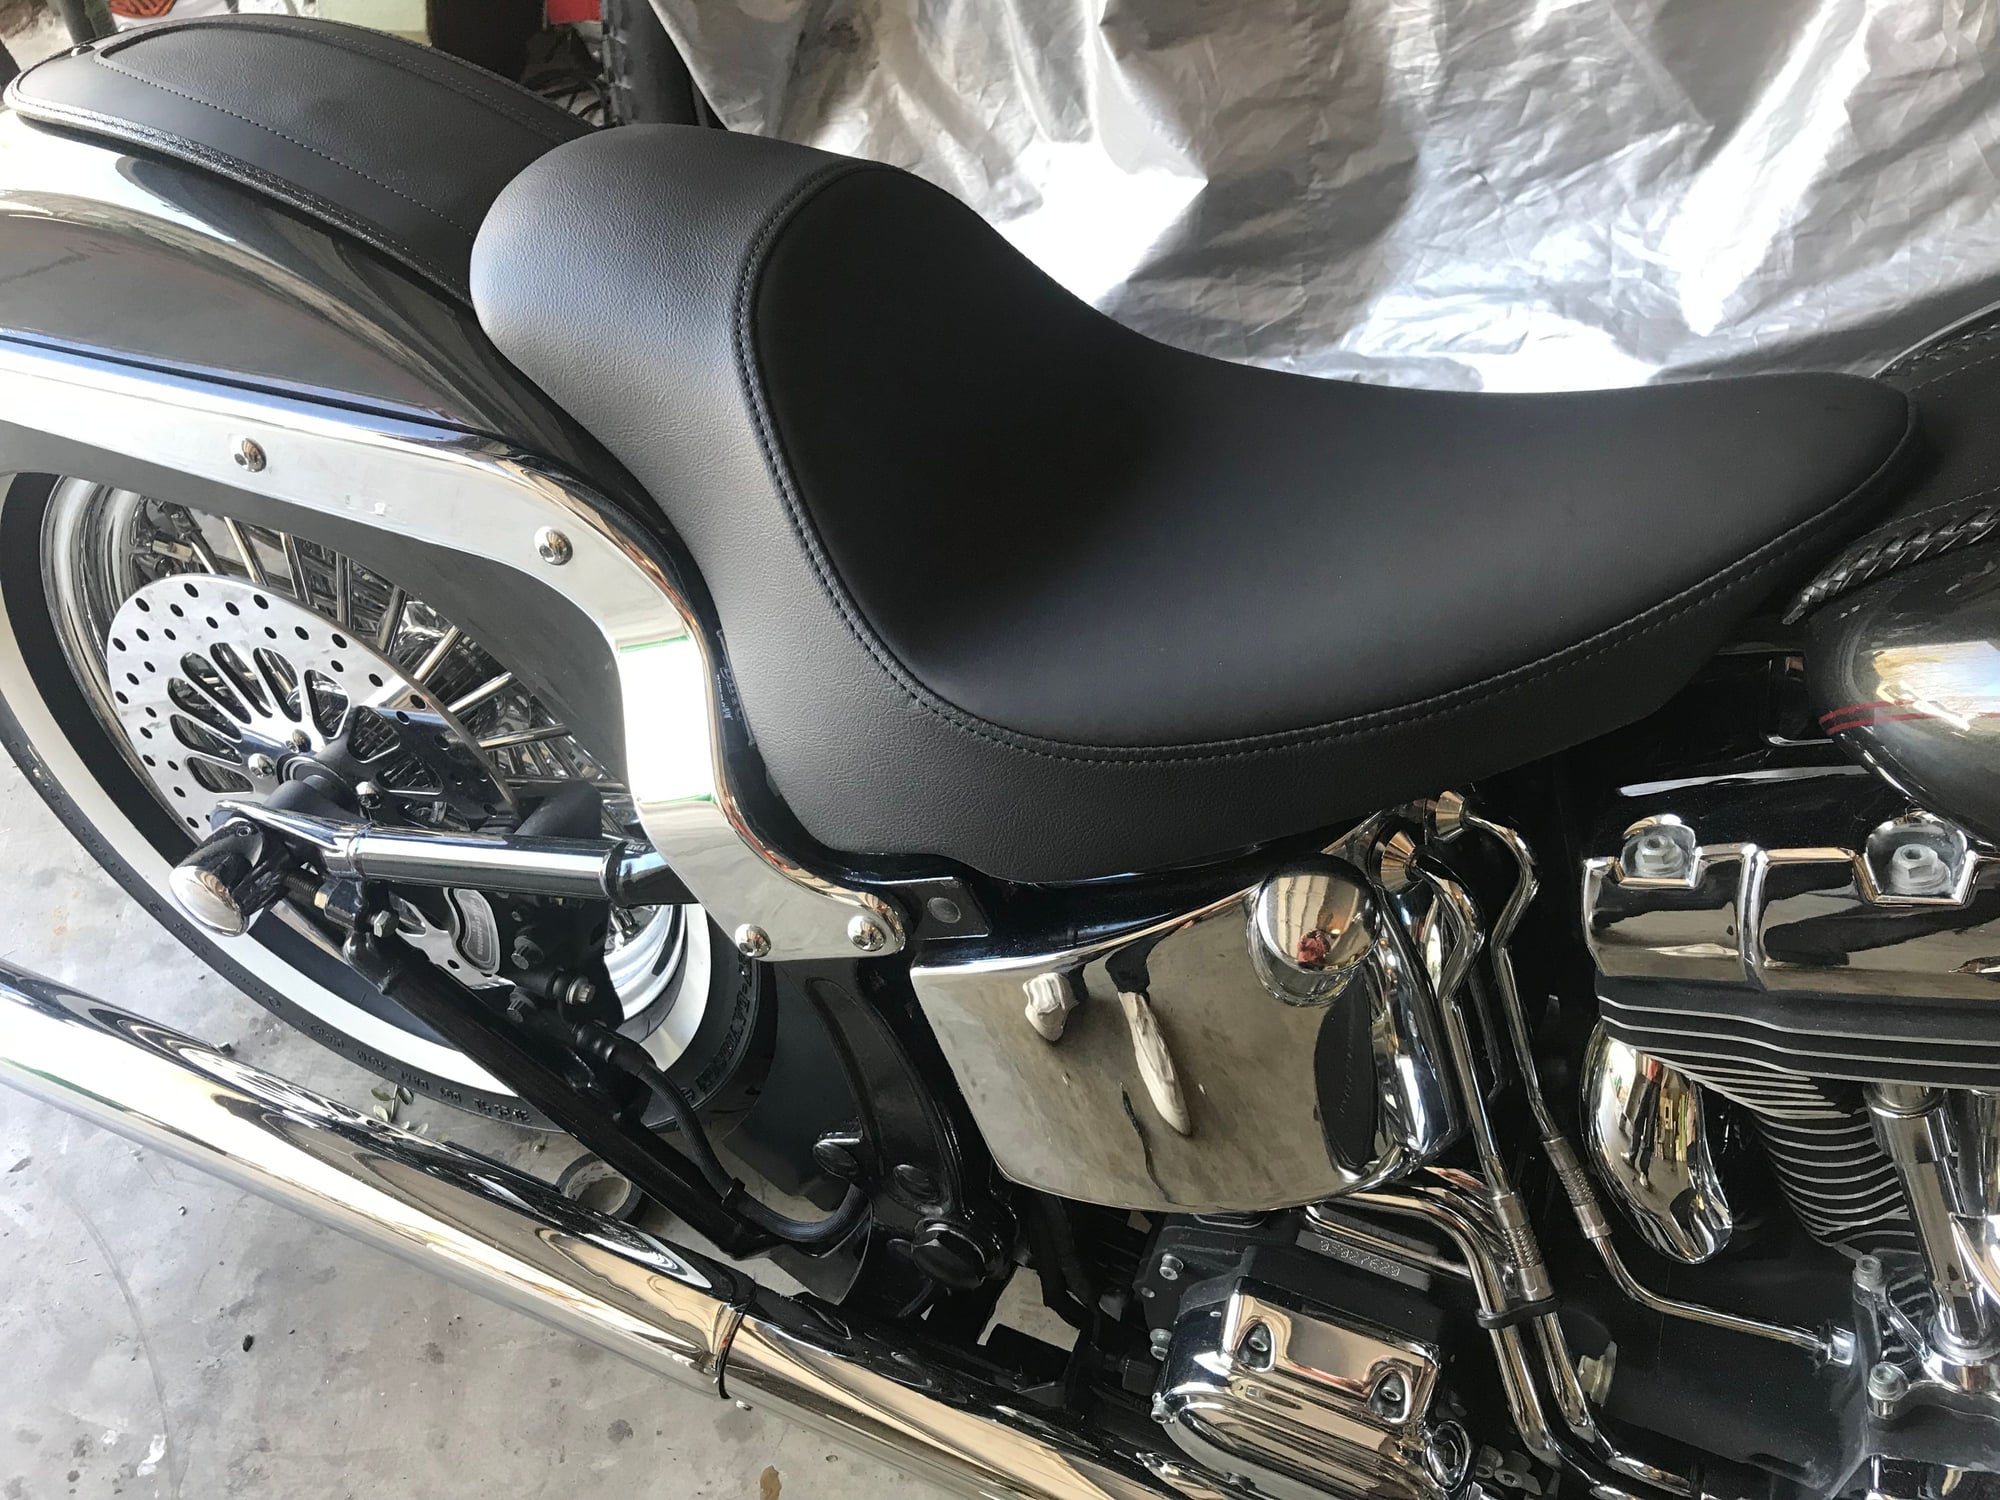 New Drag Solo seat 2005-2017 Deluxe and others - Harley Davidson Forums